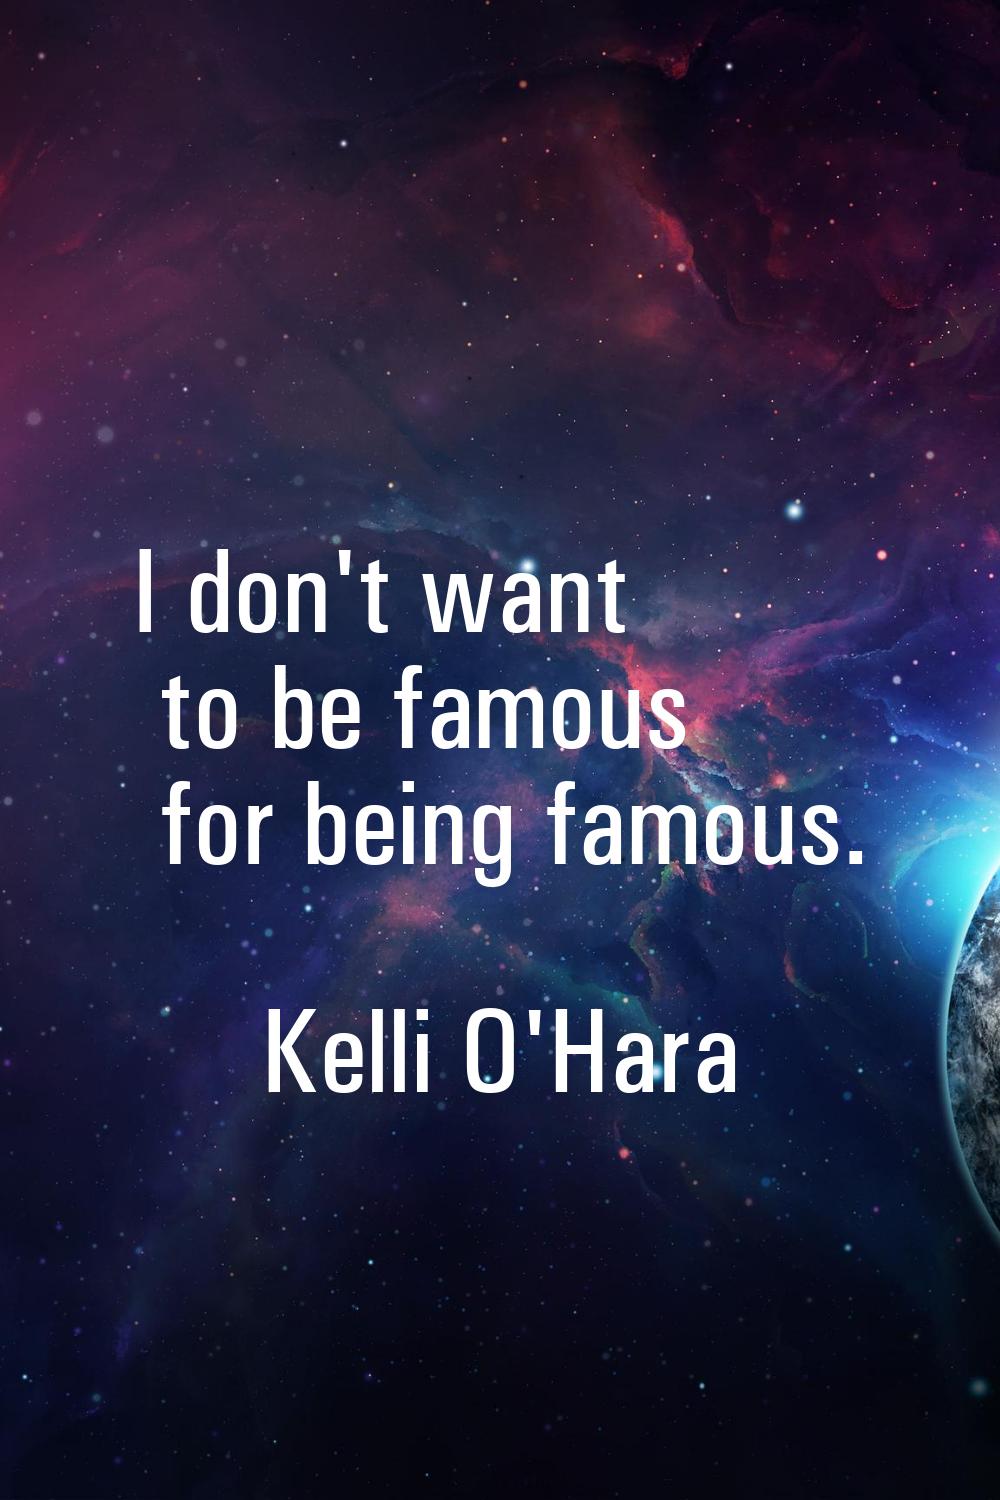 I don't want to be famous for being famous.